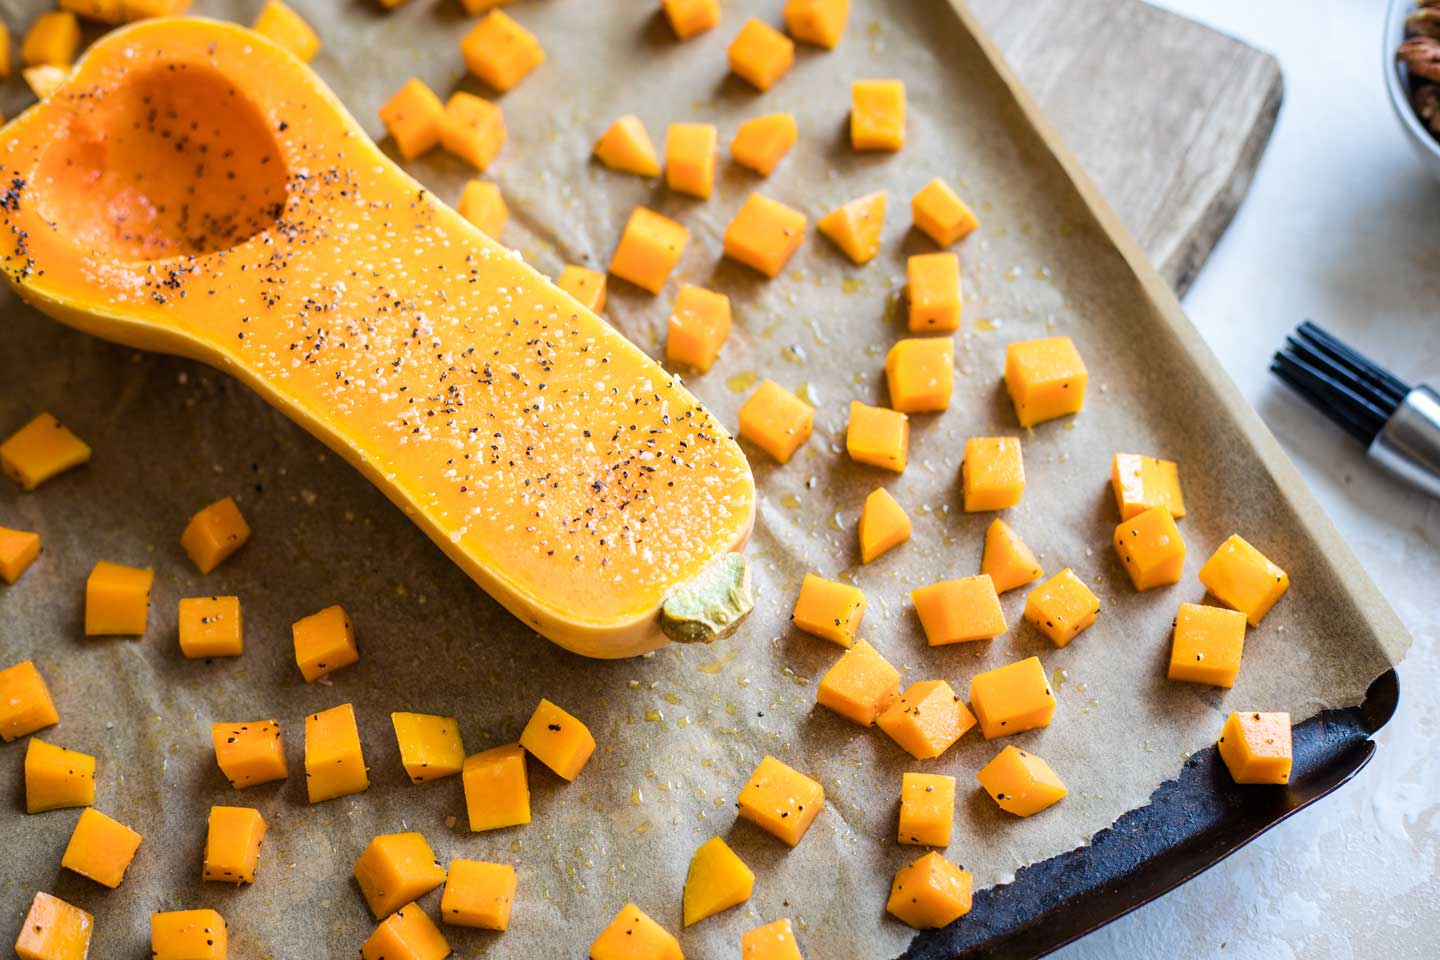 cubed squash spread out on baking sheet, with prepared squash half, face-up, in center of baking sheet so you can see it's sprinkled with salt and pepper